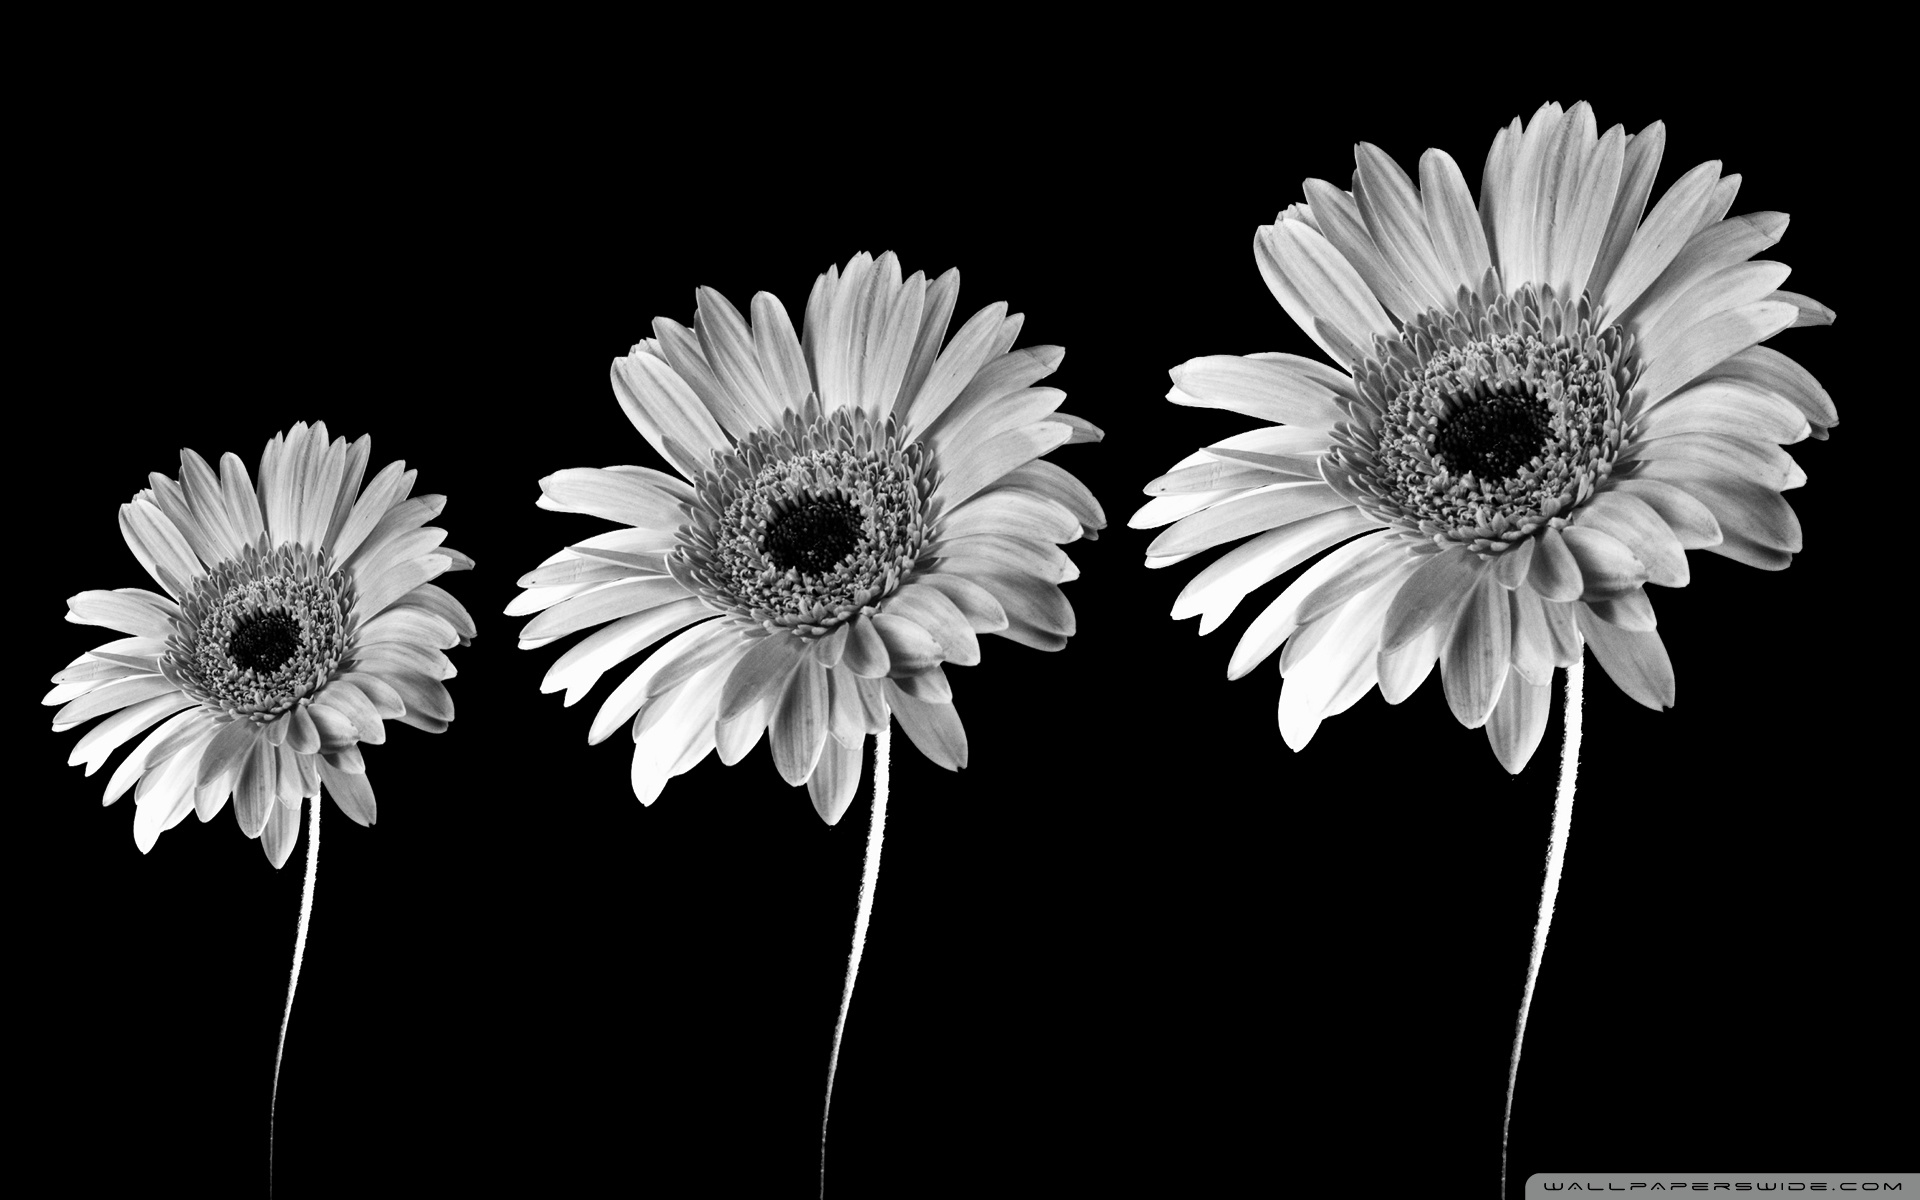 Gerbera Daisies Black And White Ultra Hd Desktop Background Wallpaper For 4k Uhd Tv Tablet Smartphone,Best Canned Cat Food For Constipation